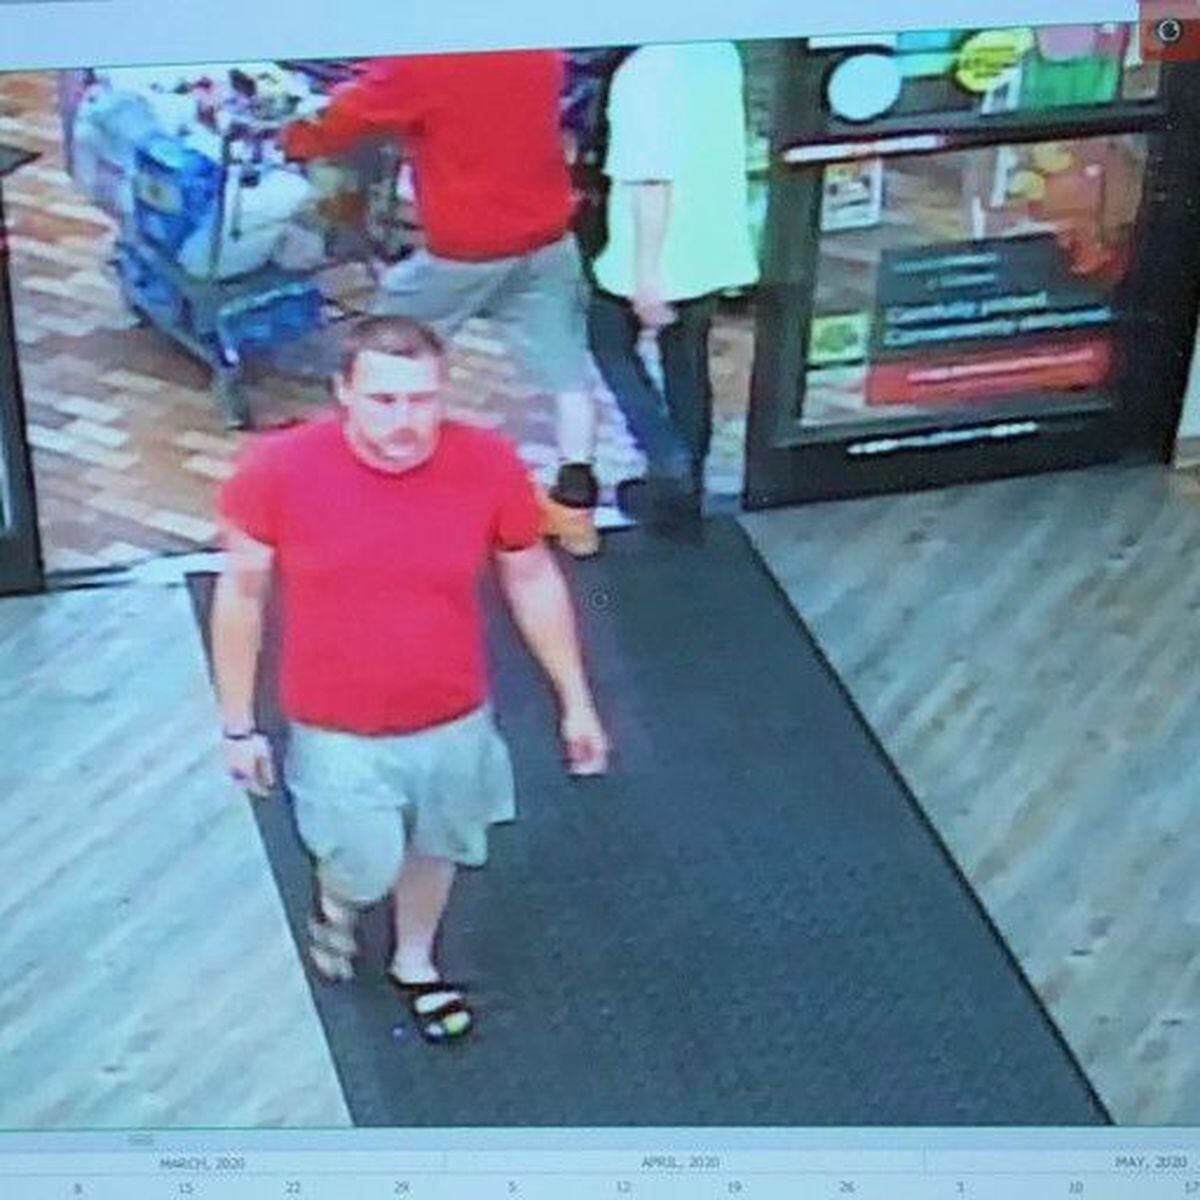 Asked to wear mask, angry man throws hot-sauce bottle at Acme employee in Bucks, police say - The Philadelphia Inquirer